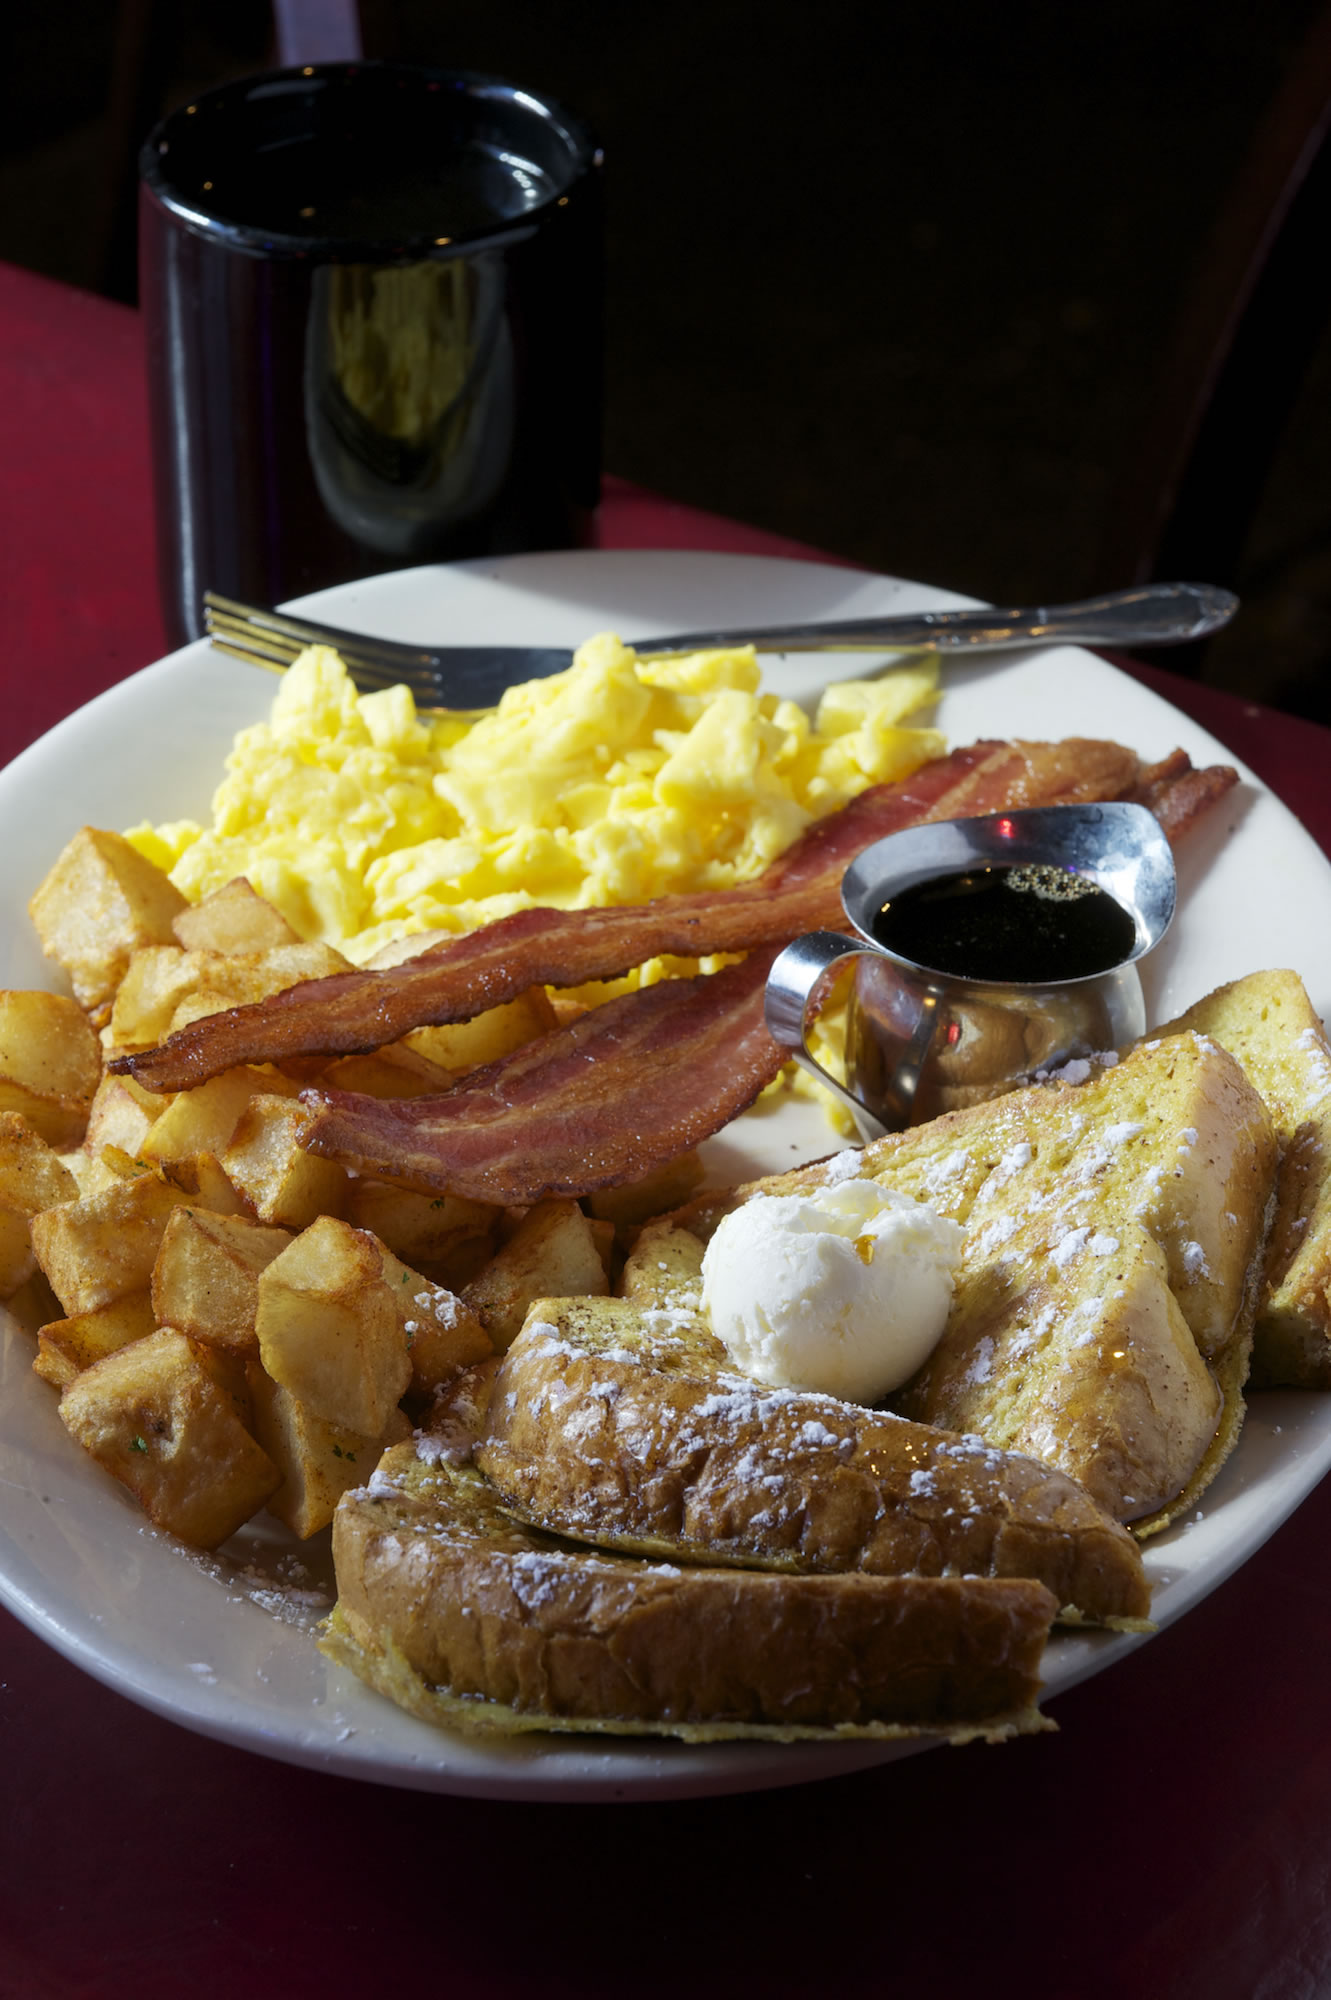 The Roadhouse Breakfast -- which includes scrambled eggs, bacon, Billygan's Potatoes and French toast with coffee -- is featured on the breakfast menu at Billygan's Roadhouse.